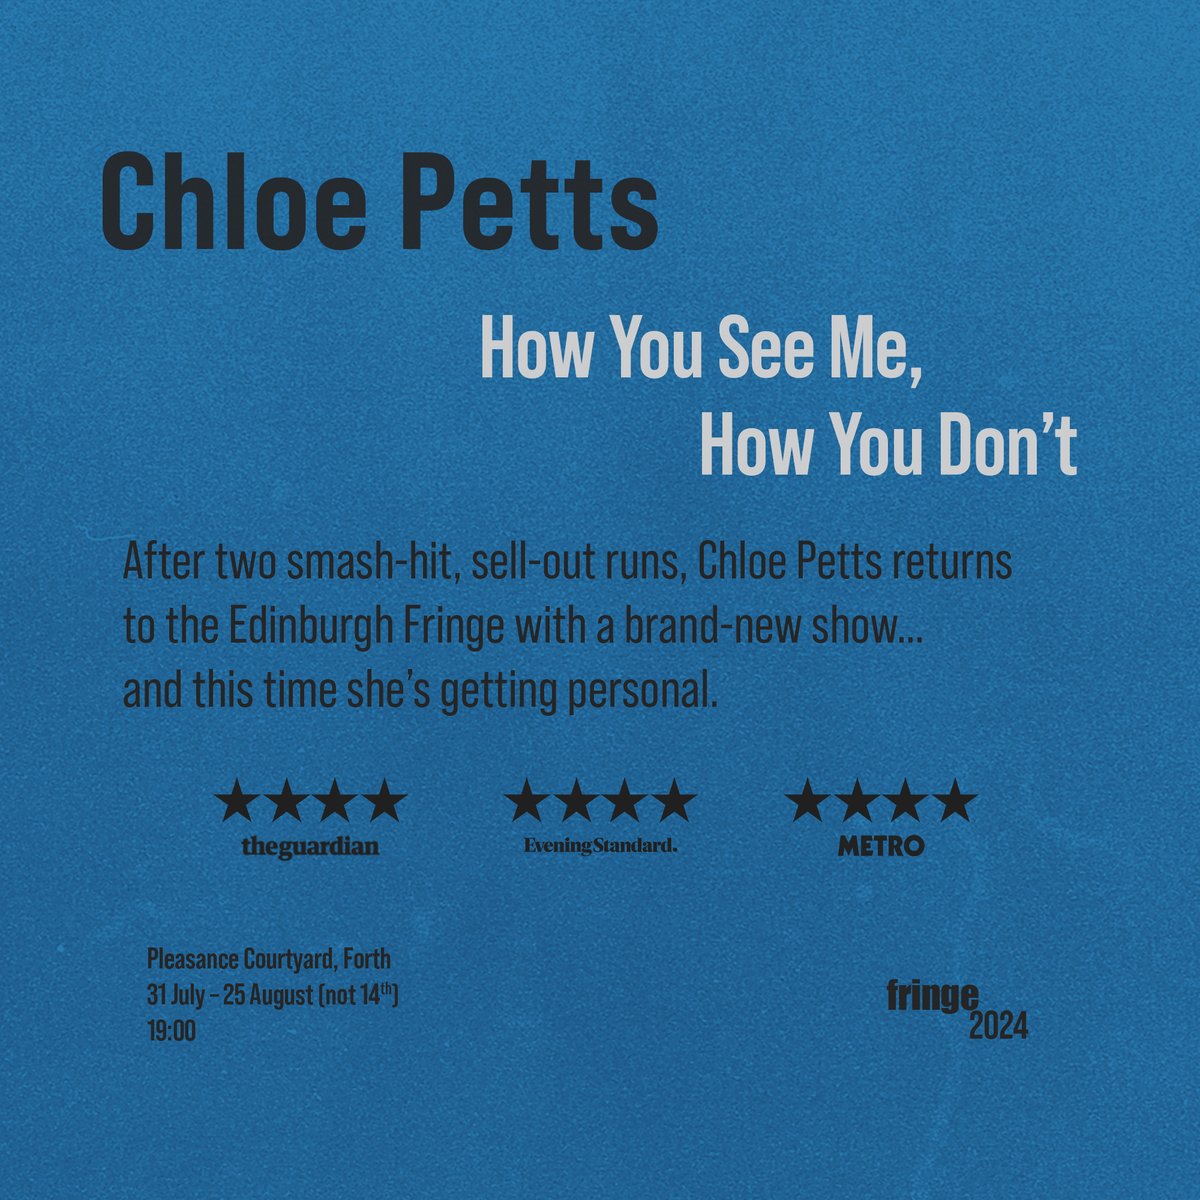 Chloe Petts X Fringe 2024 How You See Me, How You Don’t Pleasance Courtyard, Forth 31 July - 25 August (exc 14th) 19:00